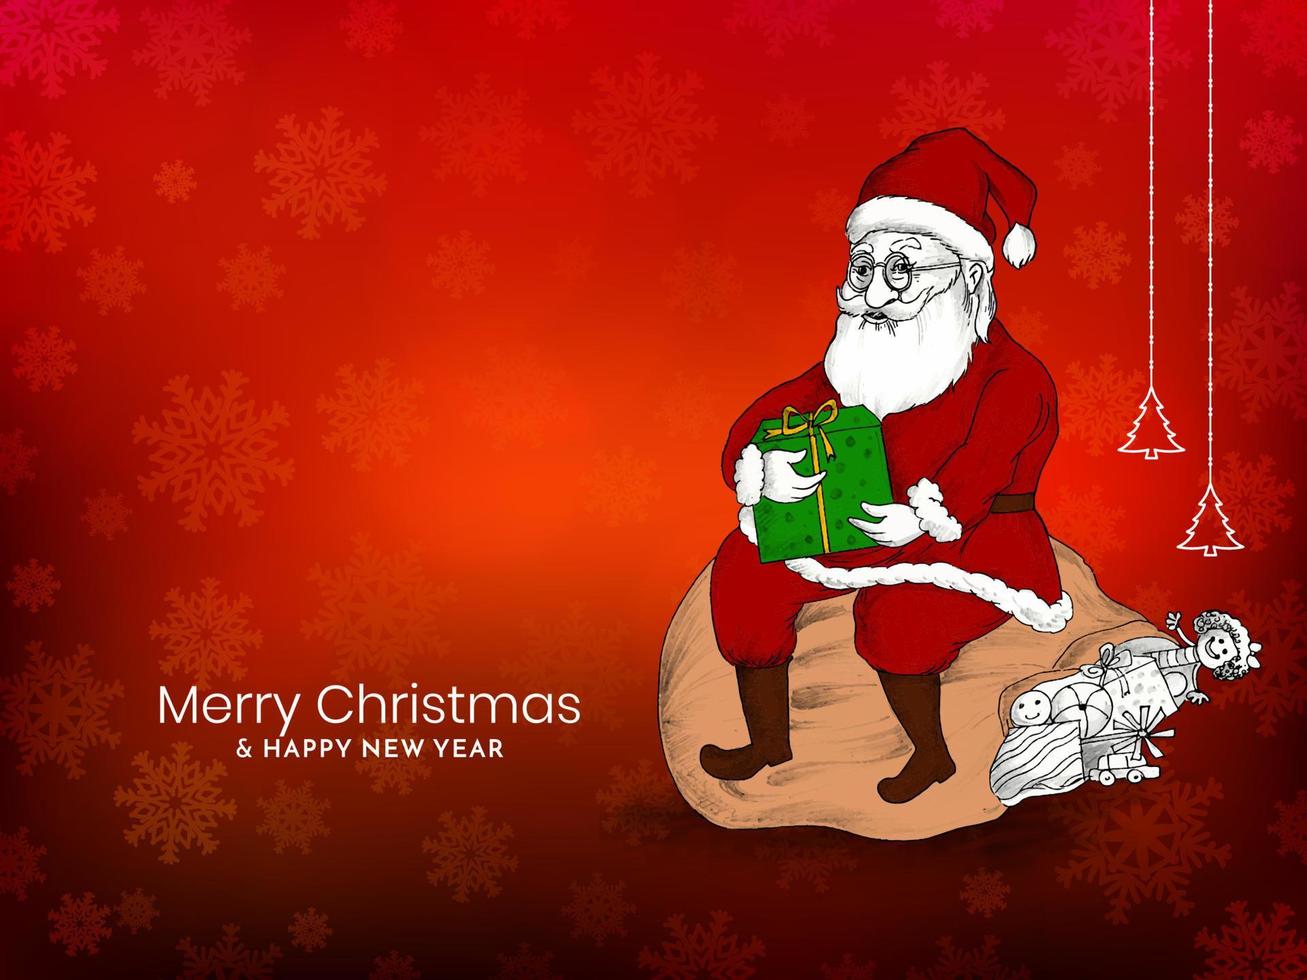 Merry Christmas festival red background with beautiful santa claus vector